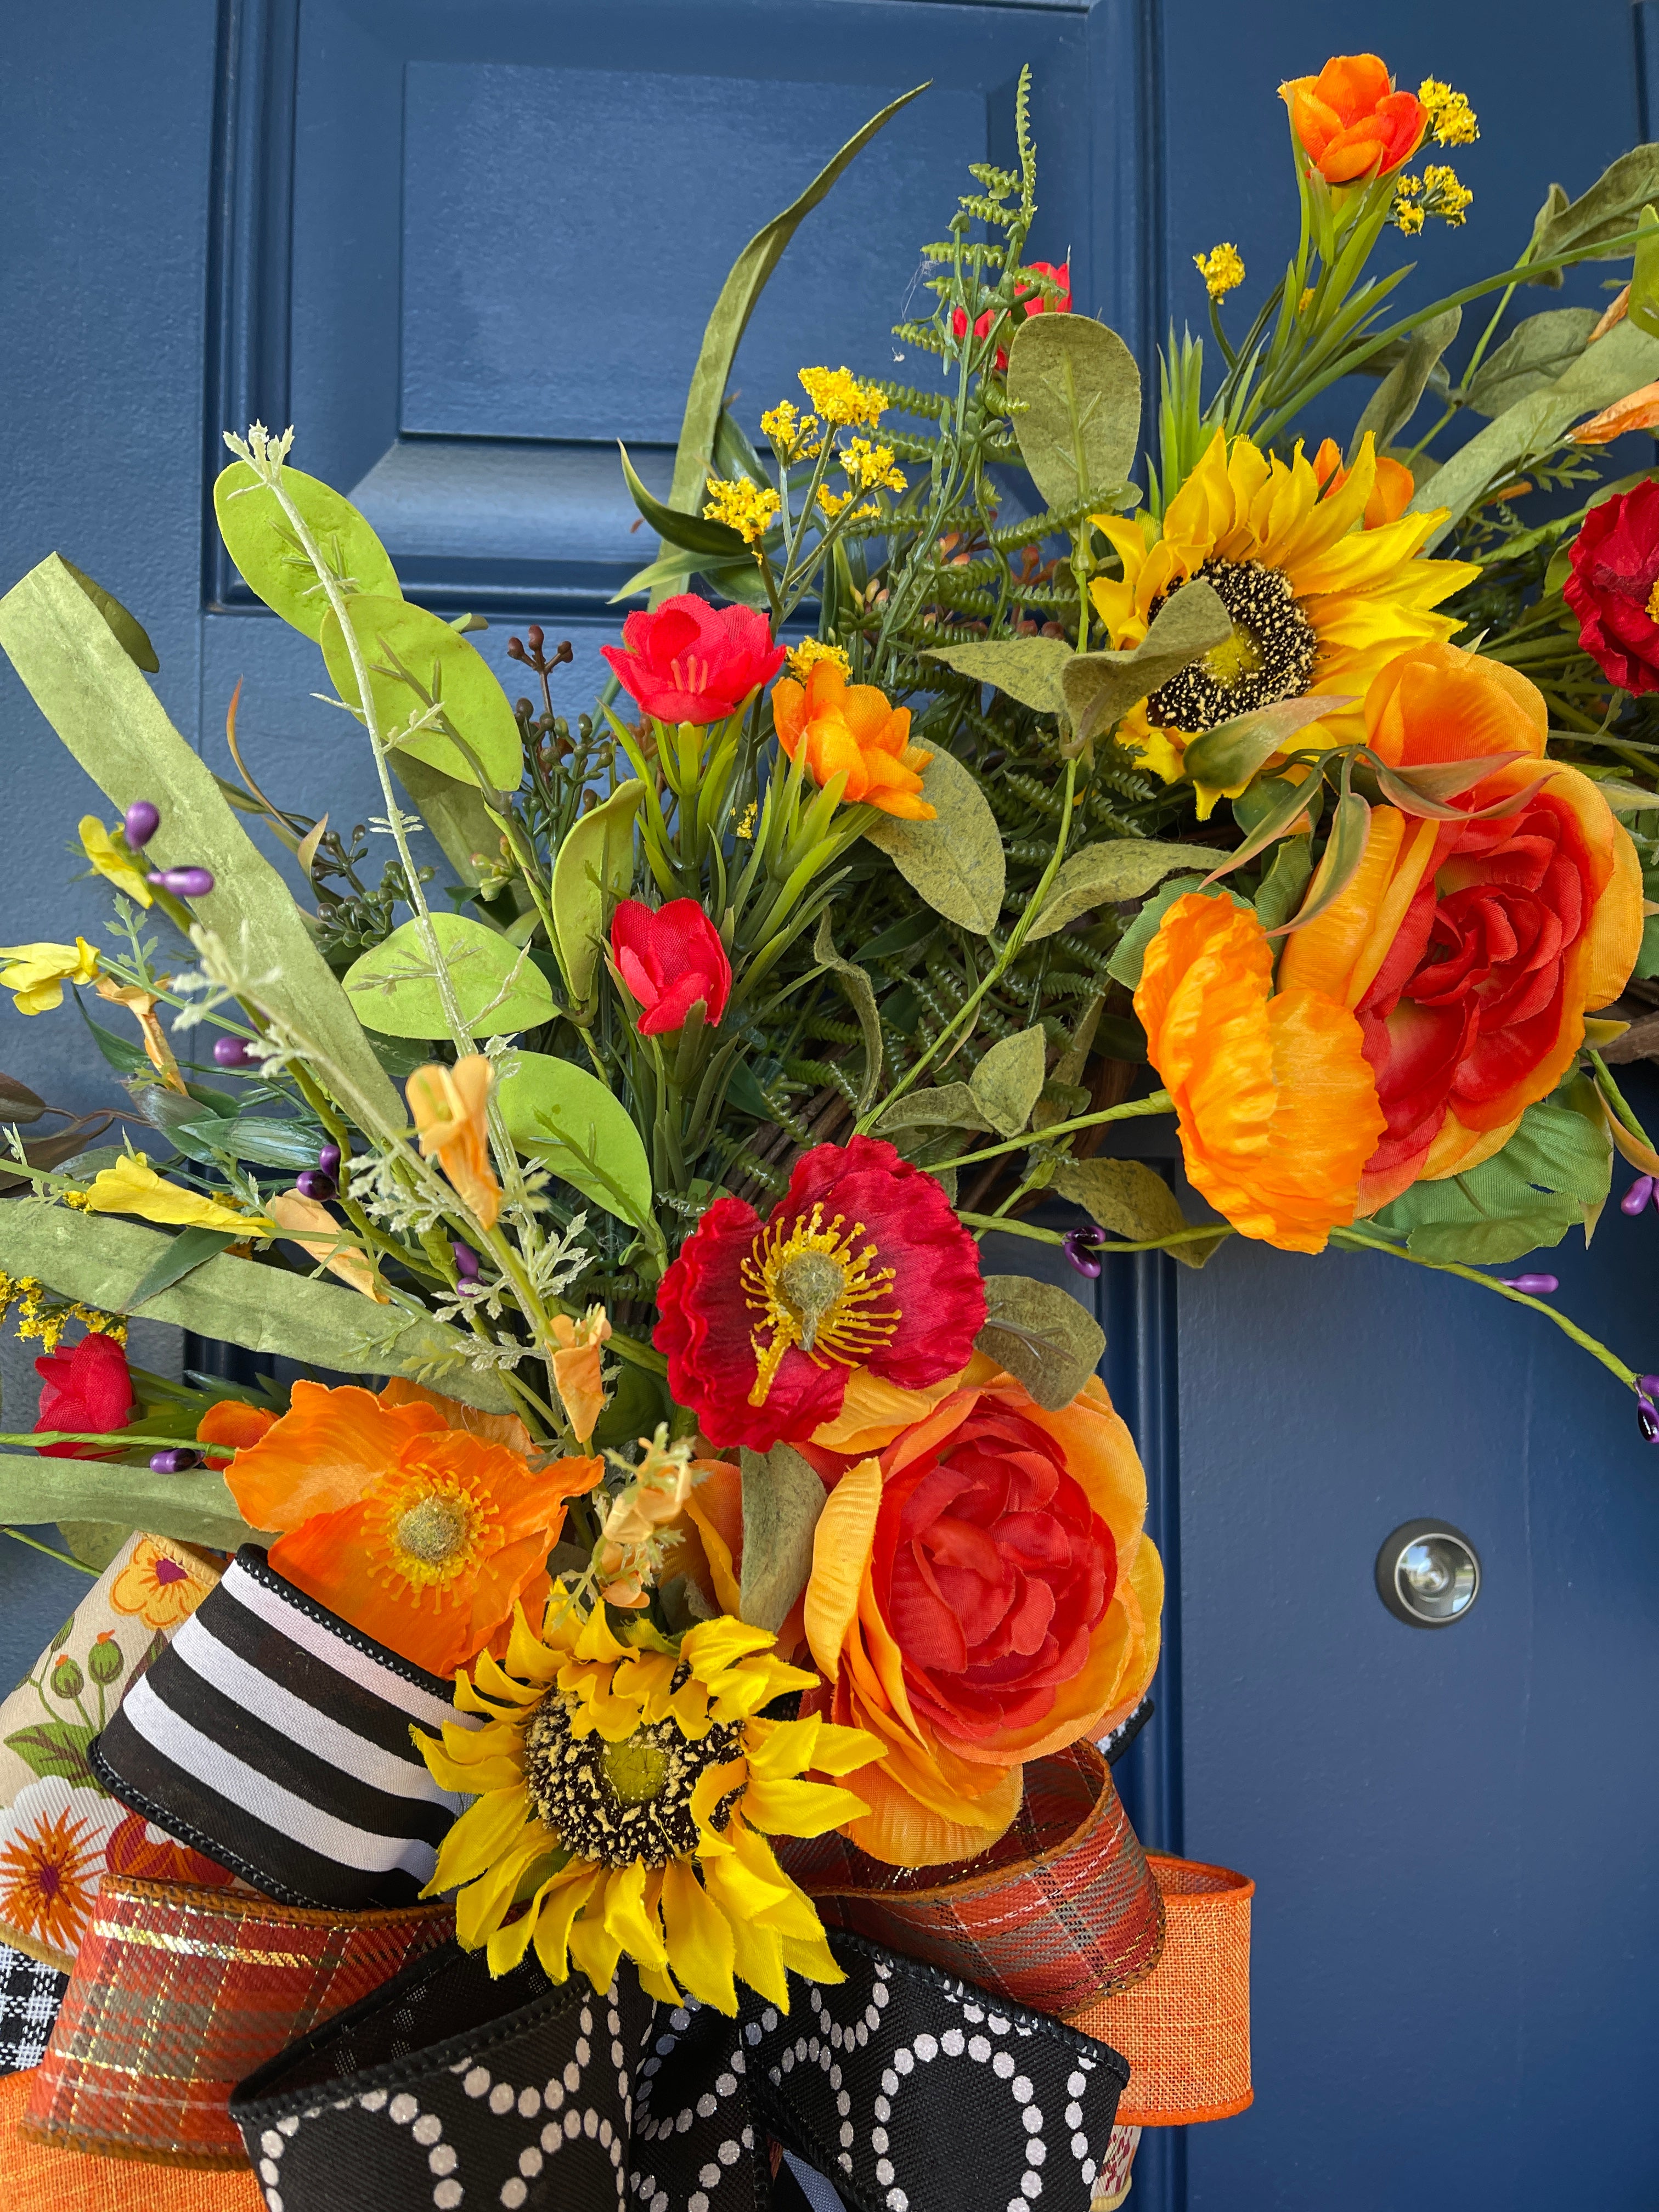 Orange, Red and Yellow Sunflowers, Poppies, Meadow Flowers and Ranunculus